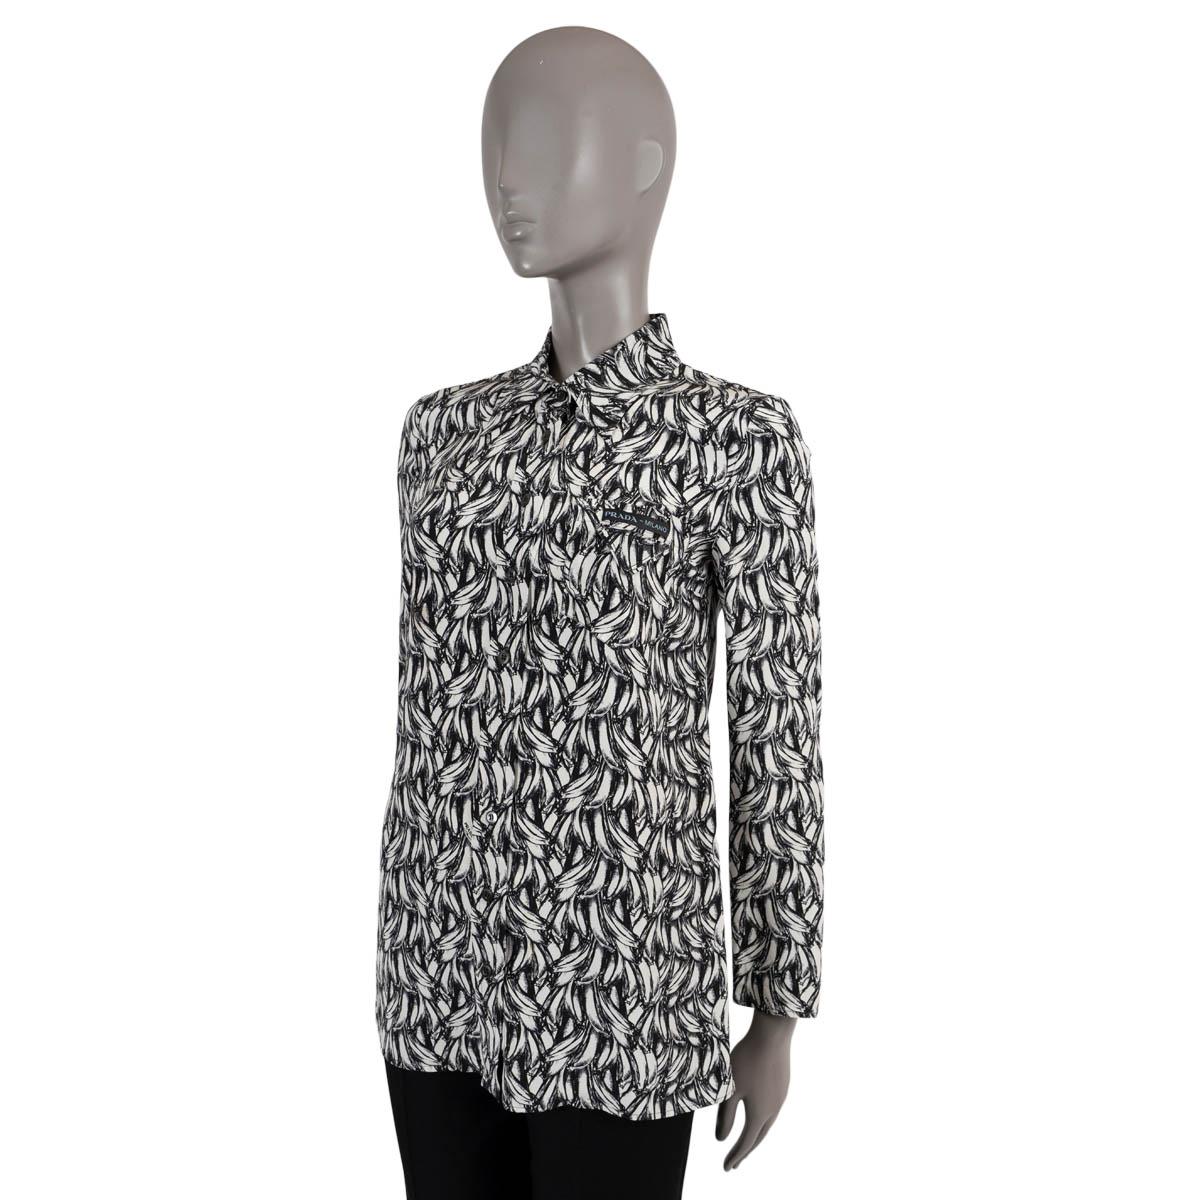 100% authentic Prada blouse in black and white silk (100%). Features a banana print and a chest pocket. Closes with concealed buttons on the front. Has been worn and is in excellent condition. 

2018 Fall/Winter

Measurements
Tag